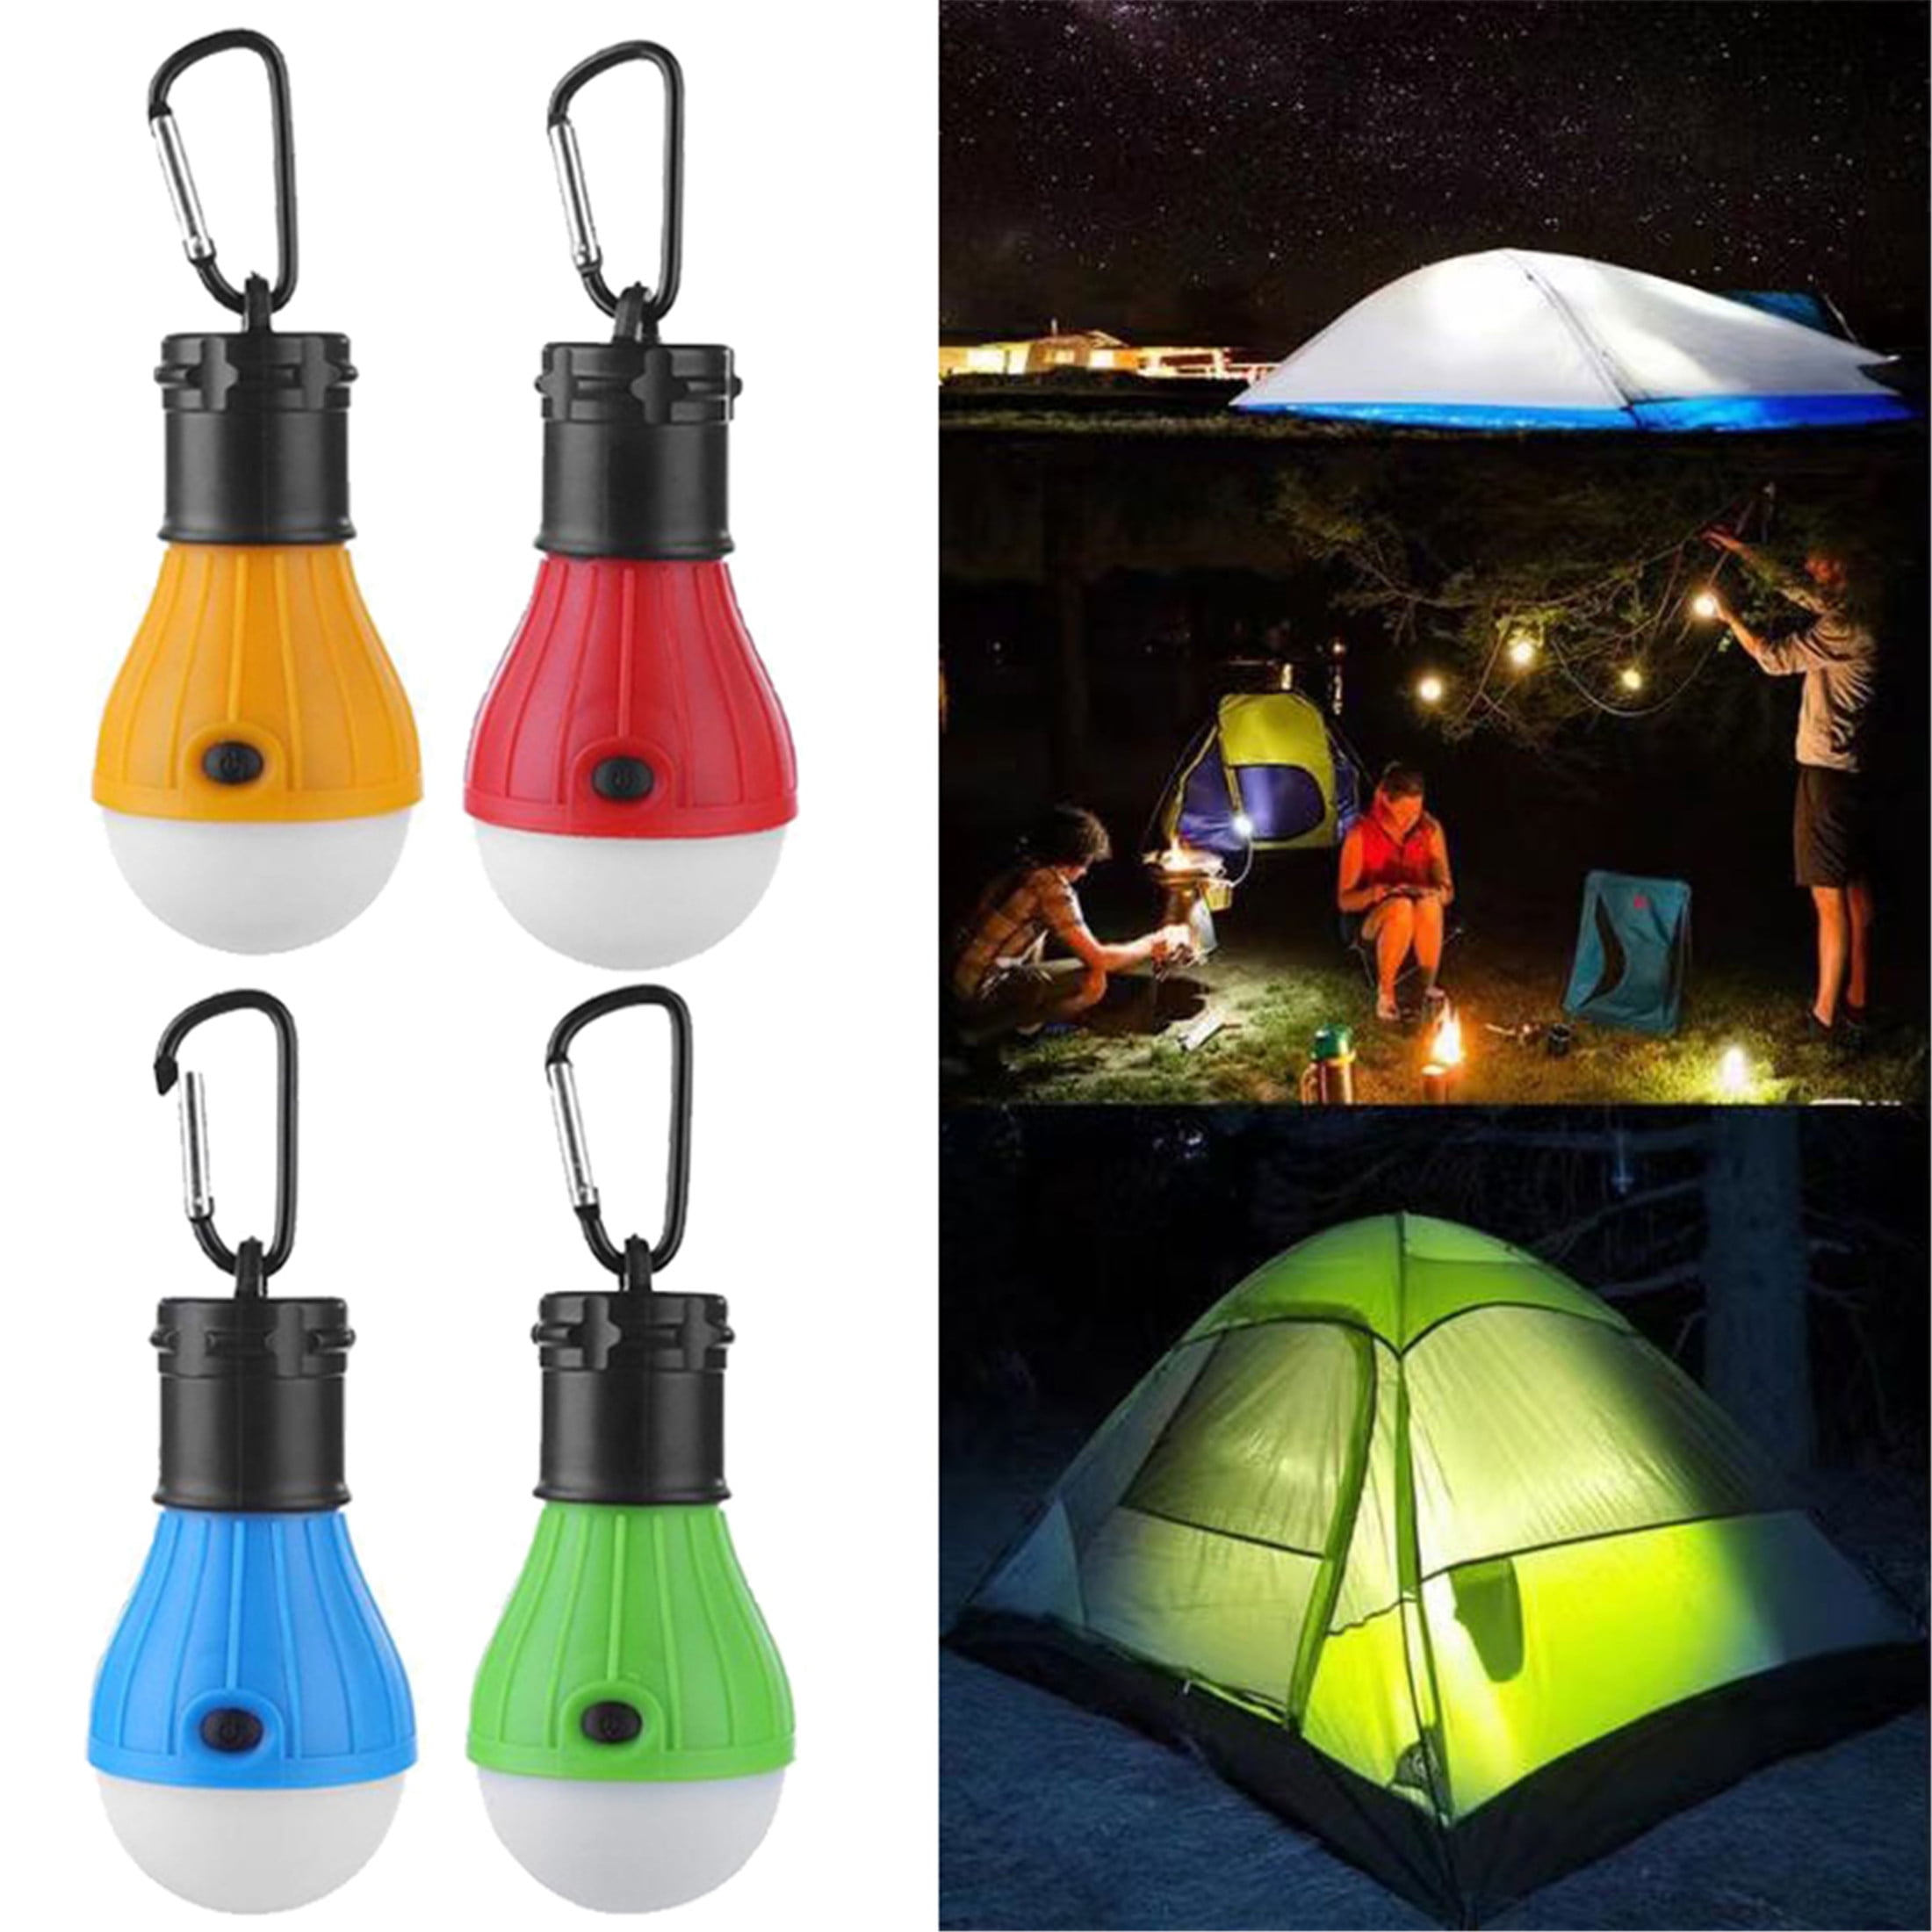 1pc LED Camping Light Lantern Lamp Flashlight for Indoor Outdoor